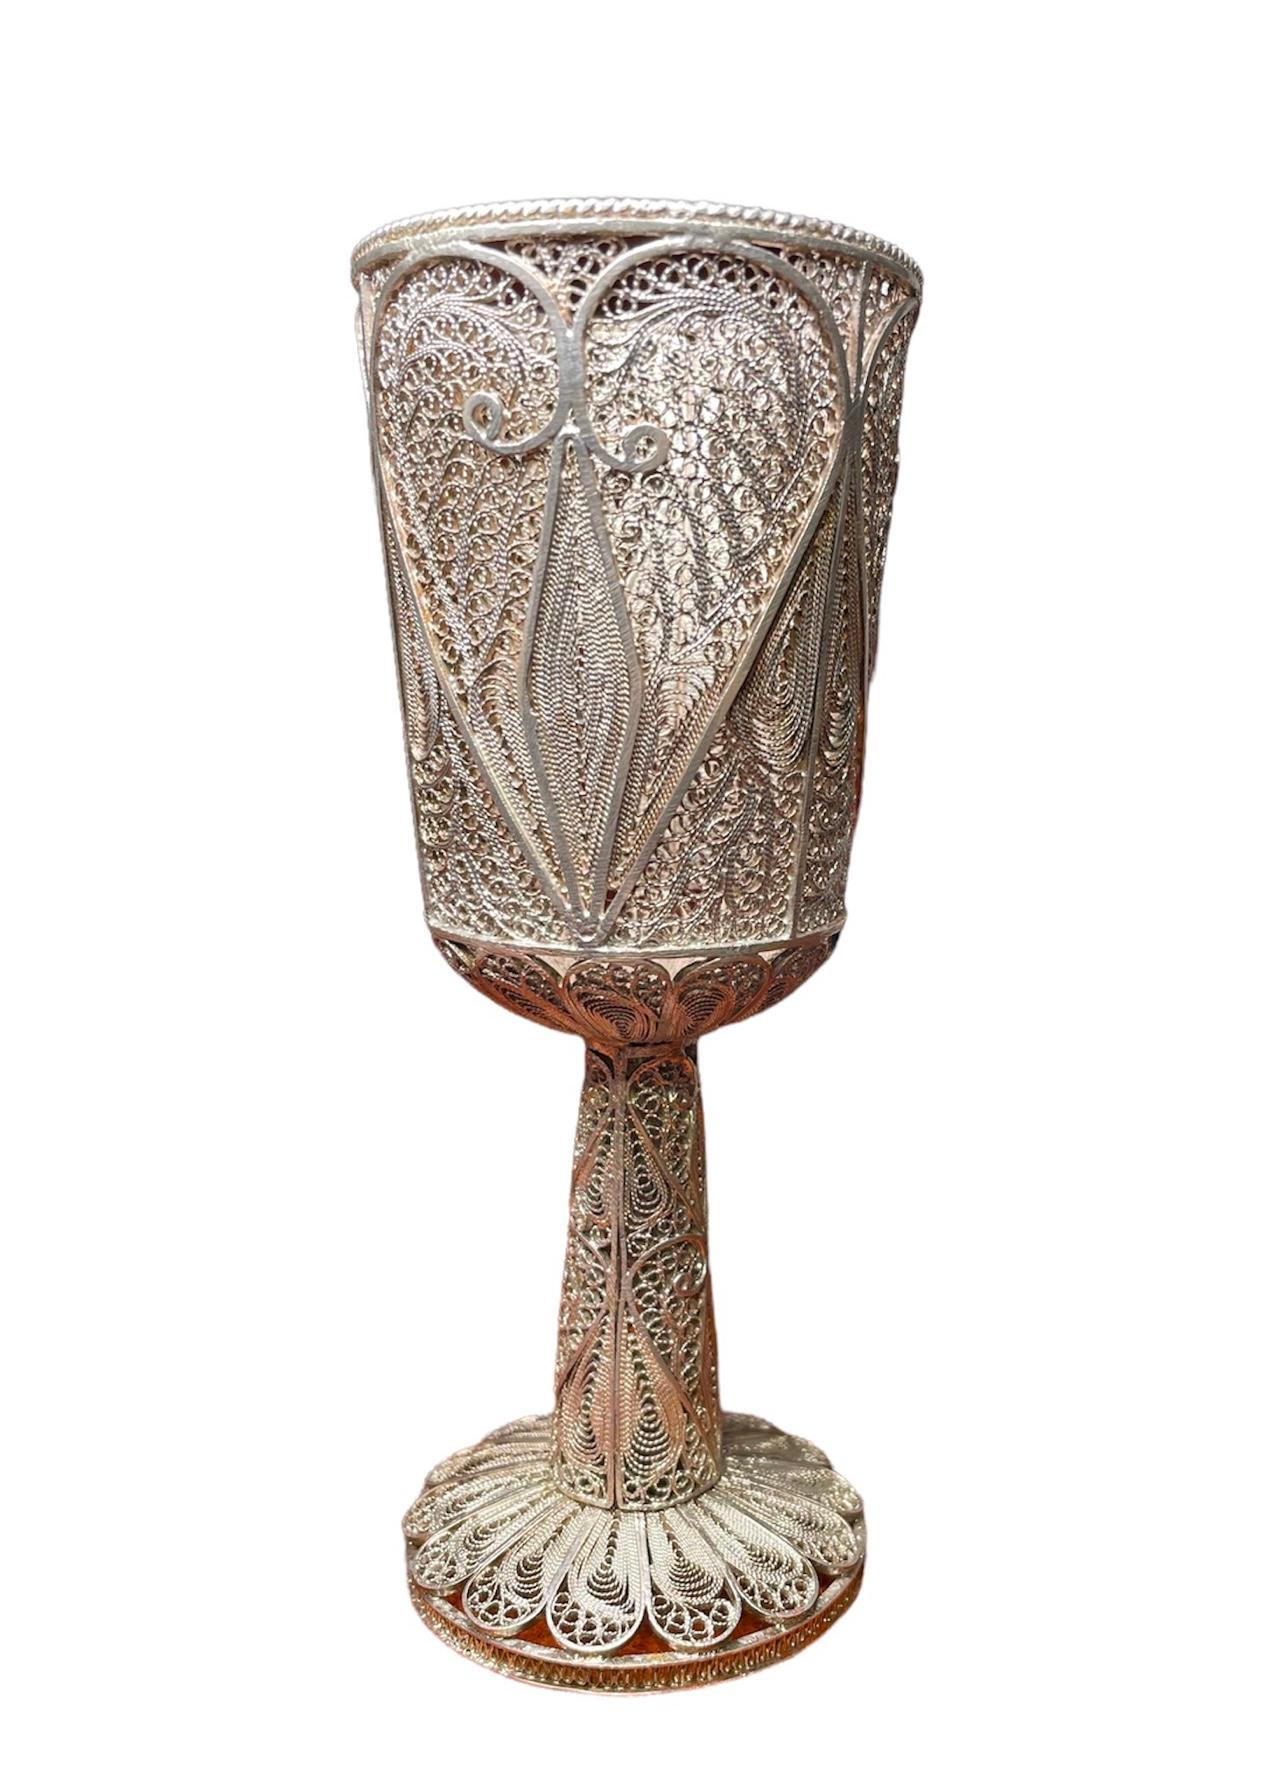 20th Century Art Deco Sterling Silver 925 Filigree Cup/Goblet For Sale